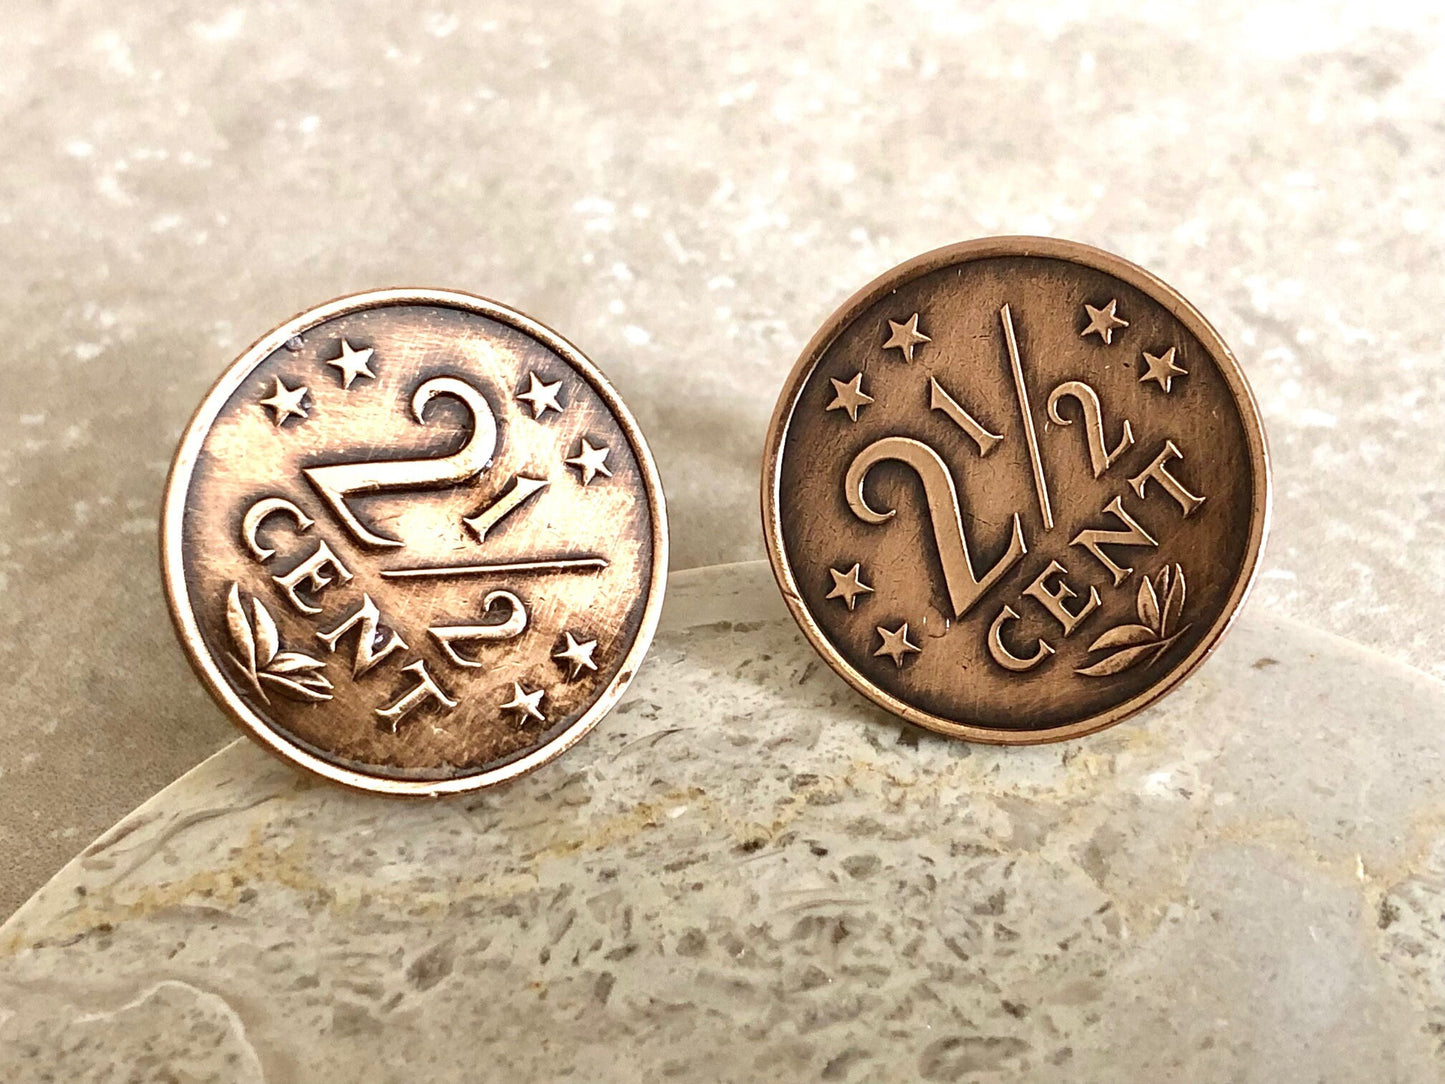 Netherlands Coin Cuff Links 2 1/2 Cents Custom Made Vintage and Rare coins - Coin Enthusiast - Suit and Tie Accessory